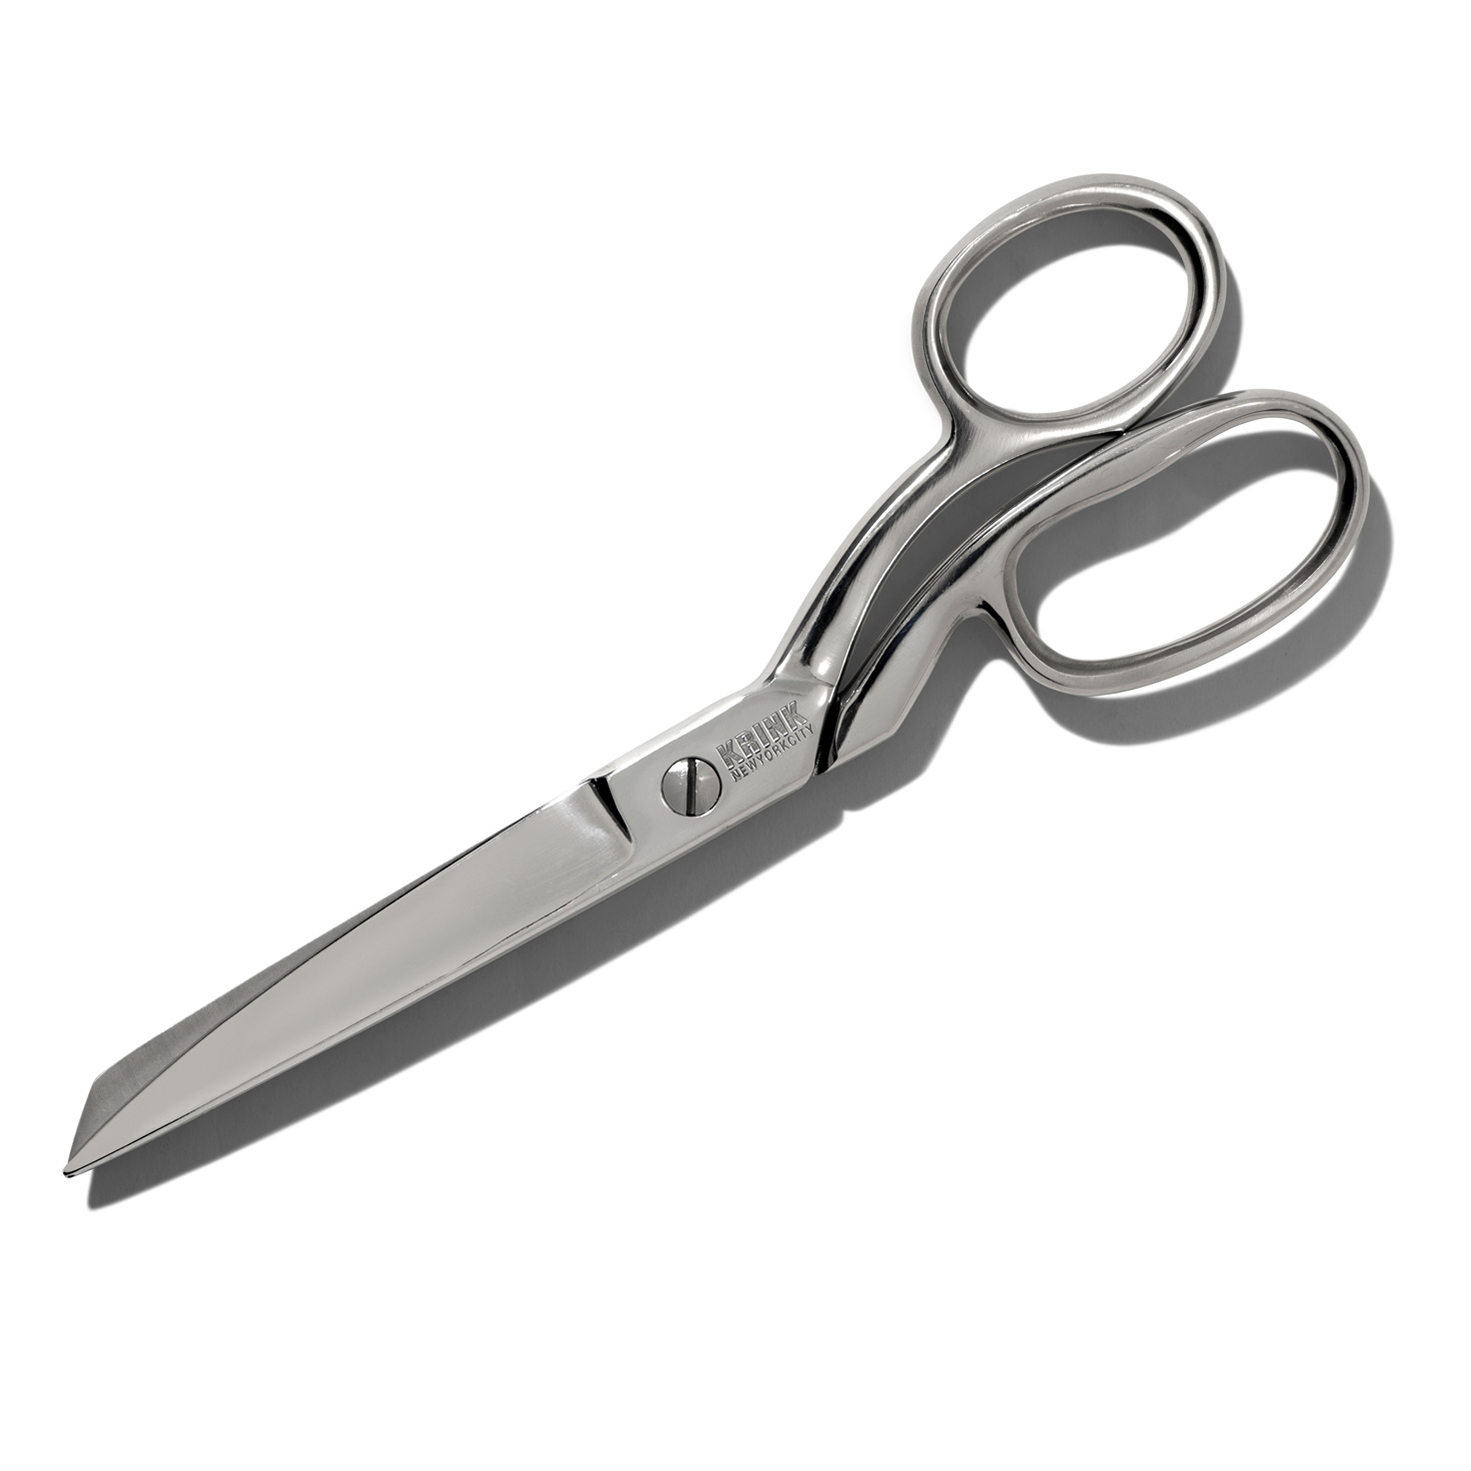 Drop Forged Stainless Steel Scissors | Krink